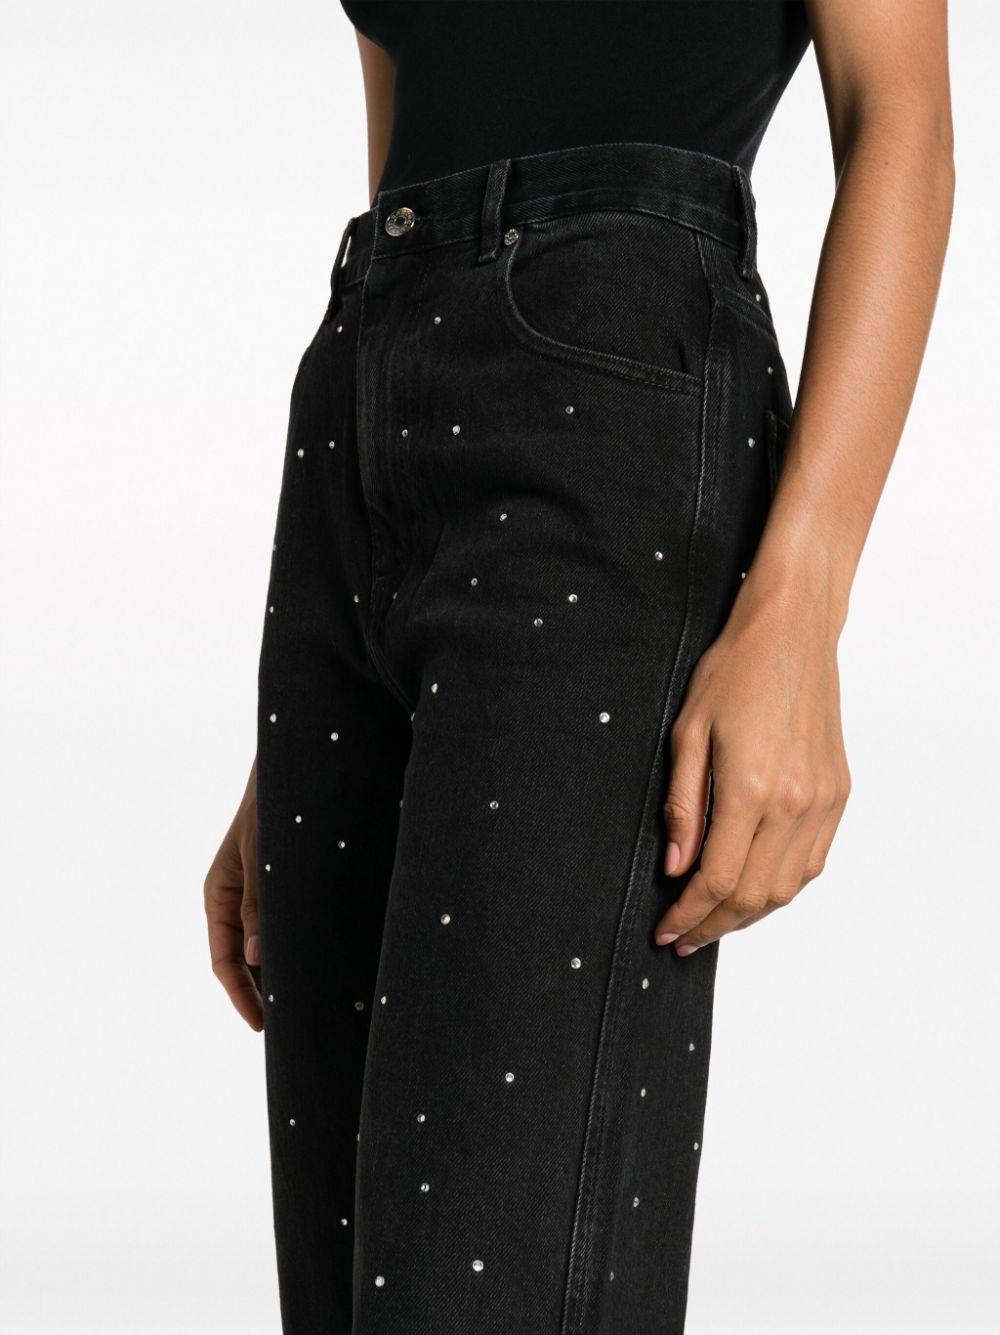 Sandro Waly Embellished Straight Leg Jeans in Charcoal Grey